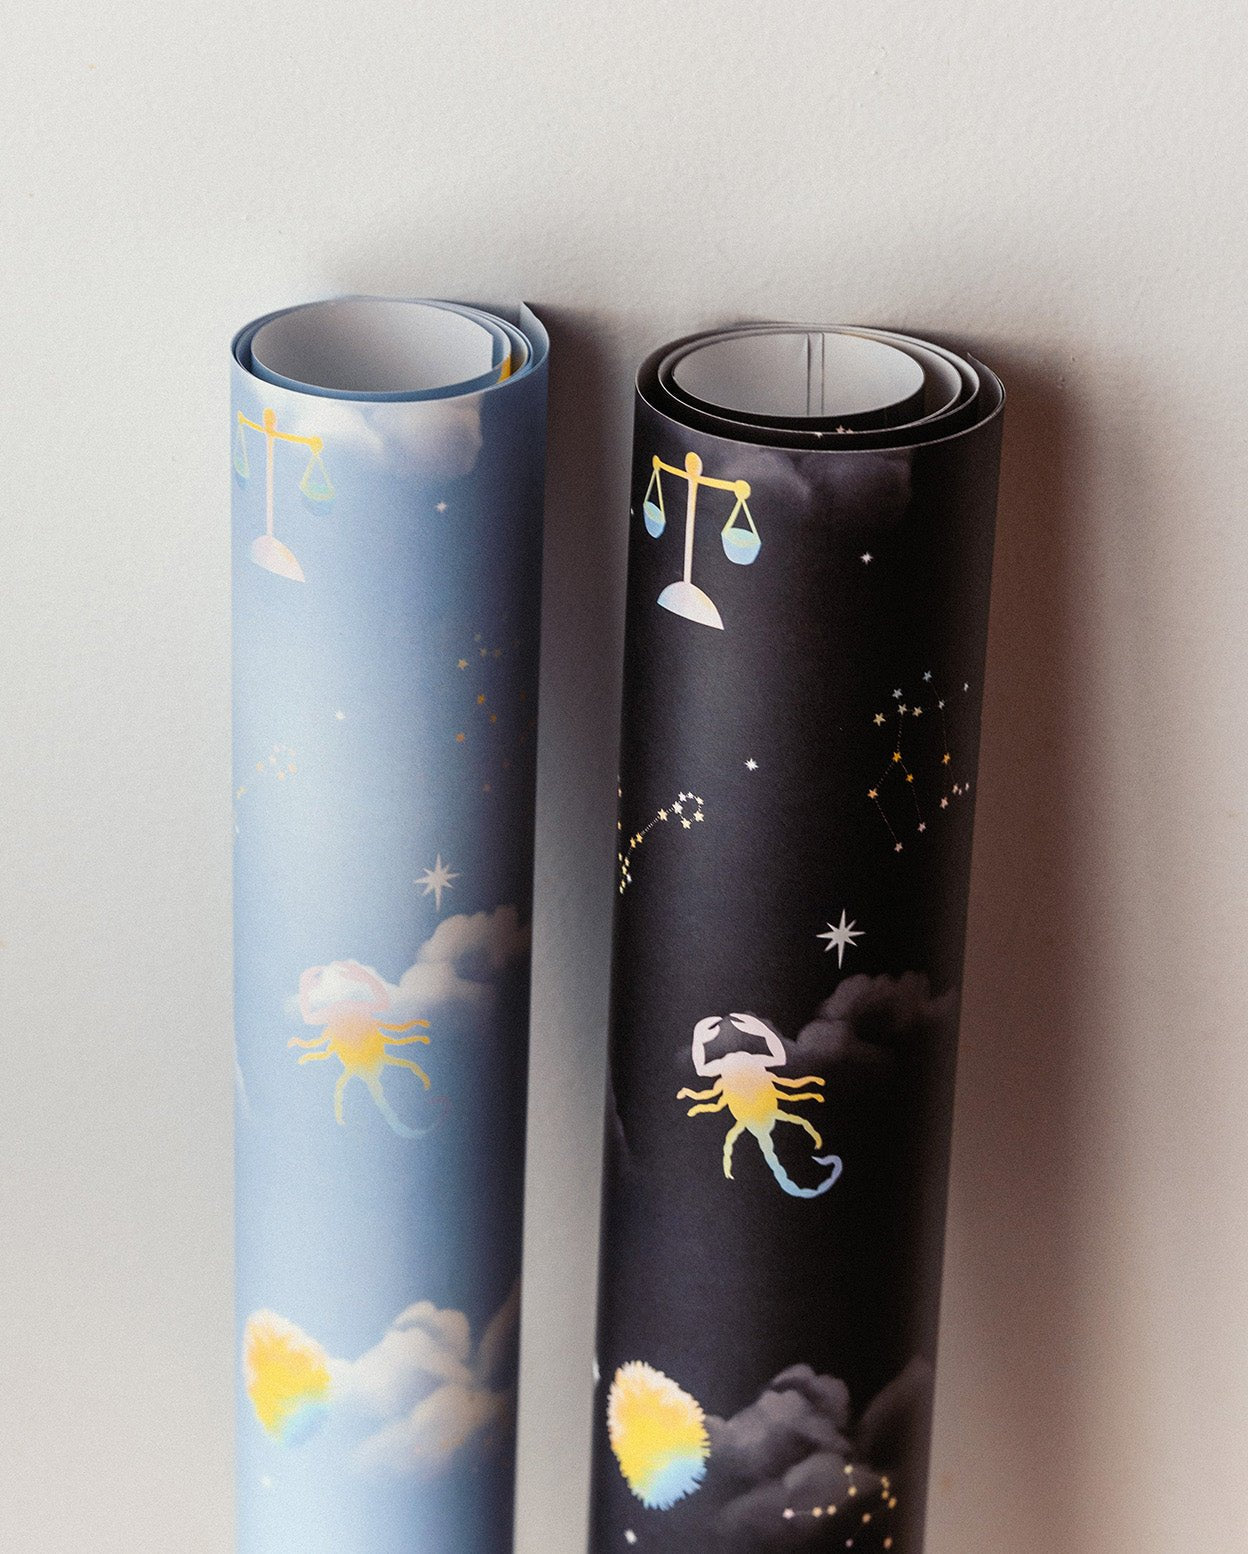 &quot;Day&quot; and &quot;Night&quot; astrological sign horoscope gift wrap.